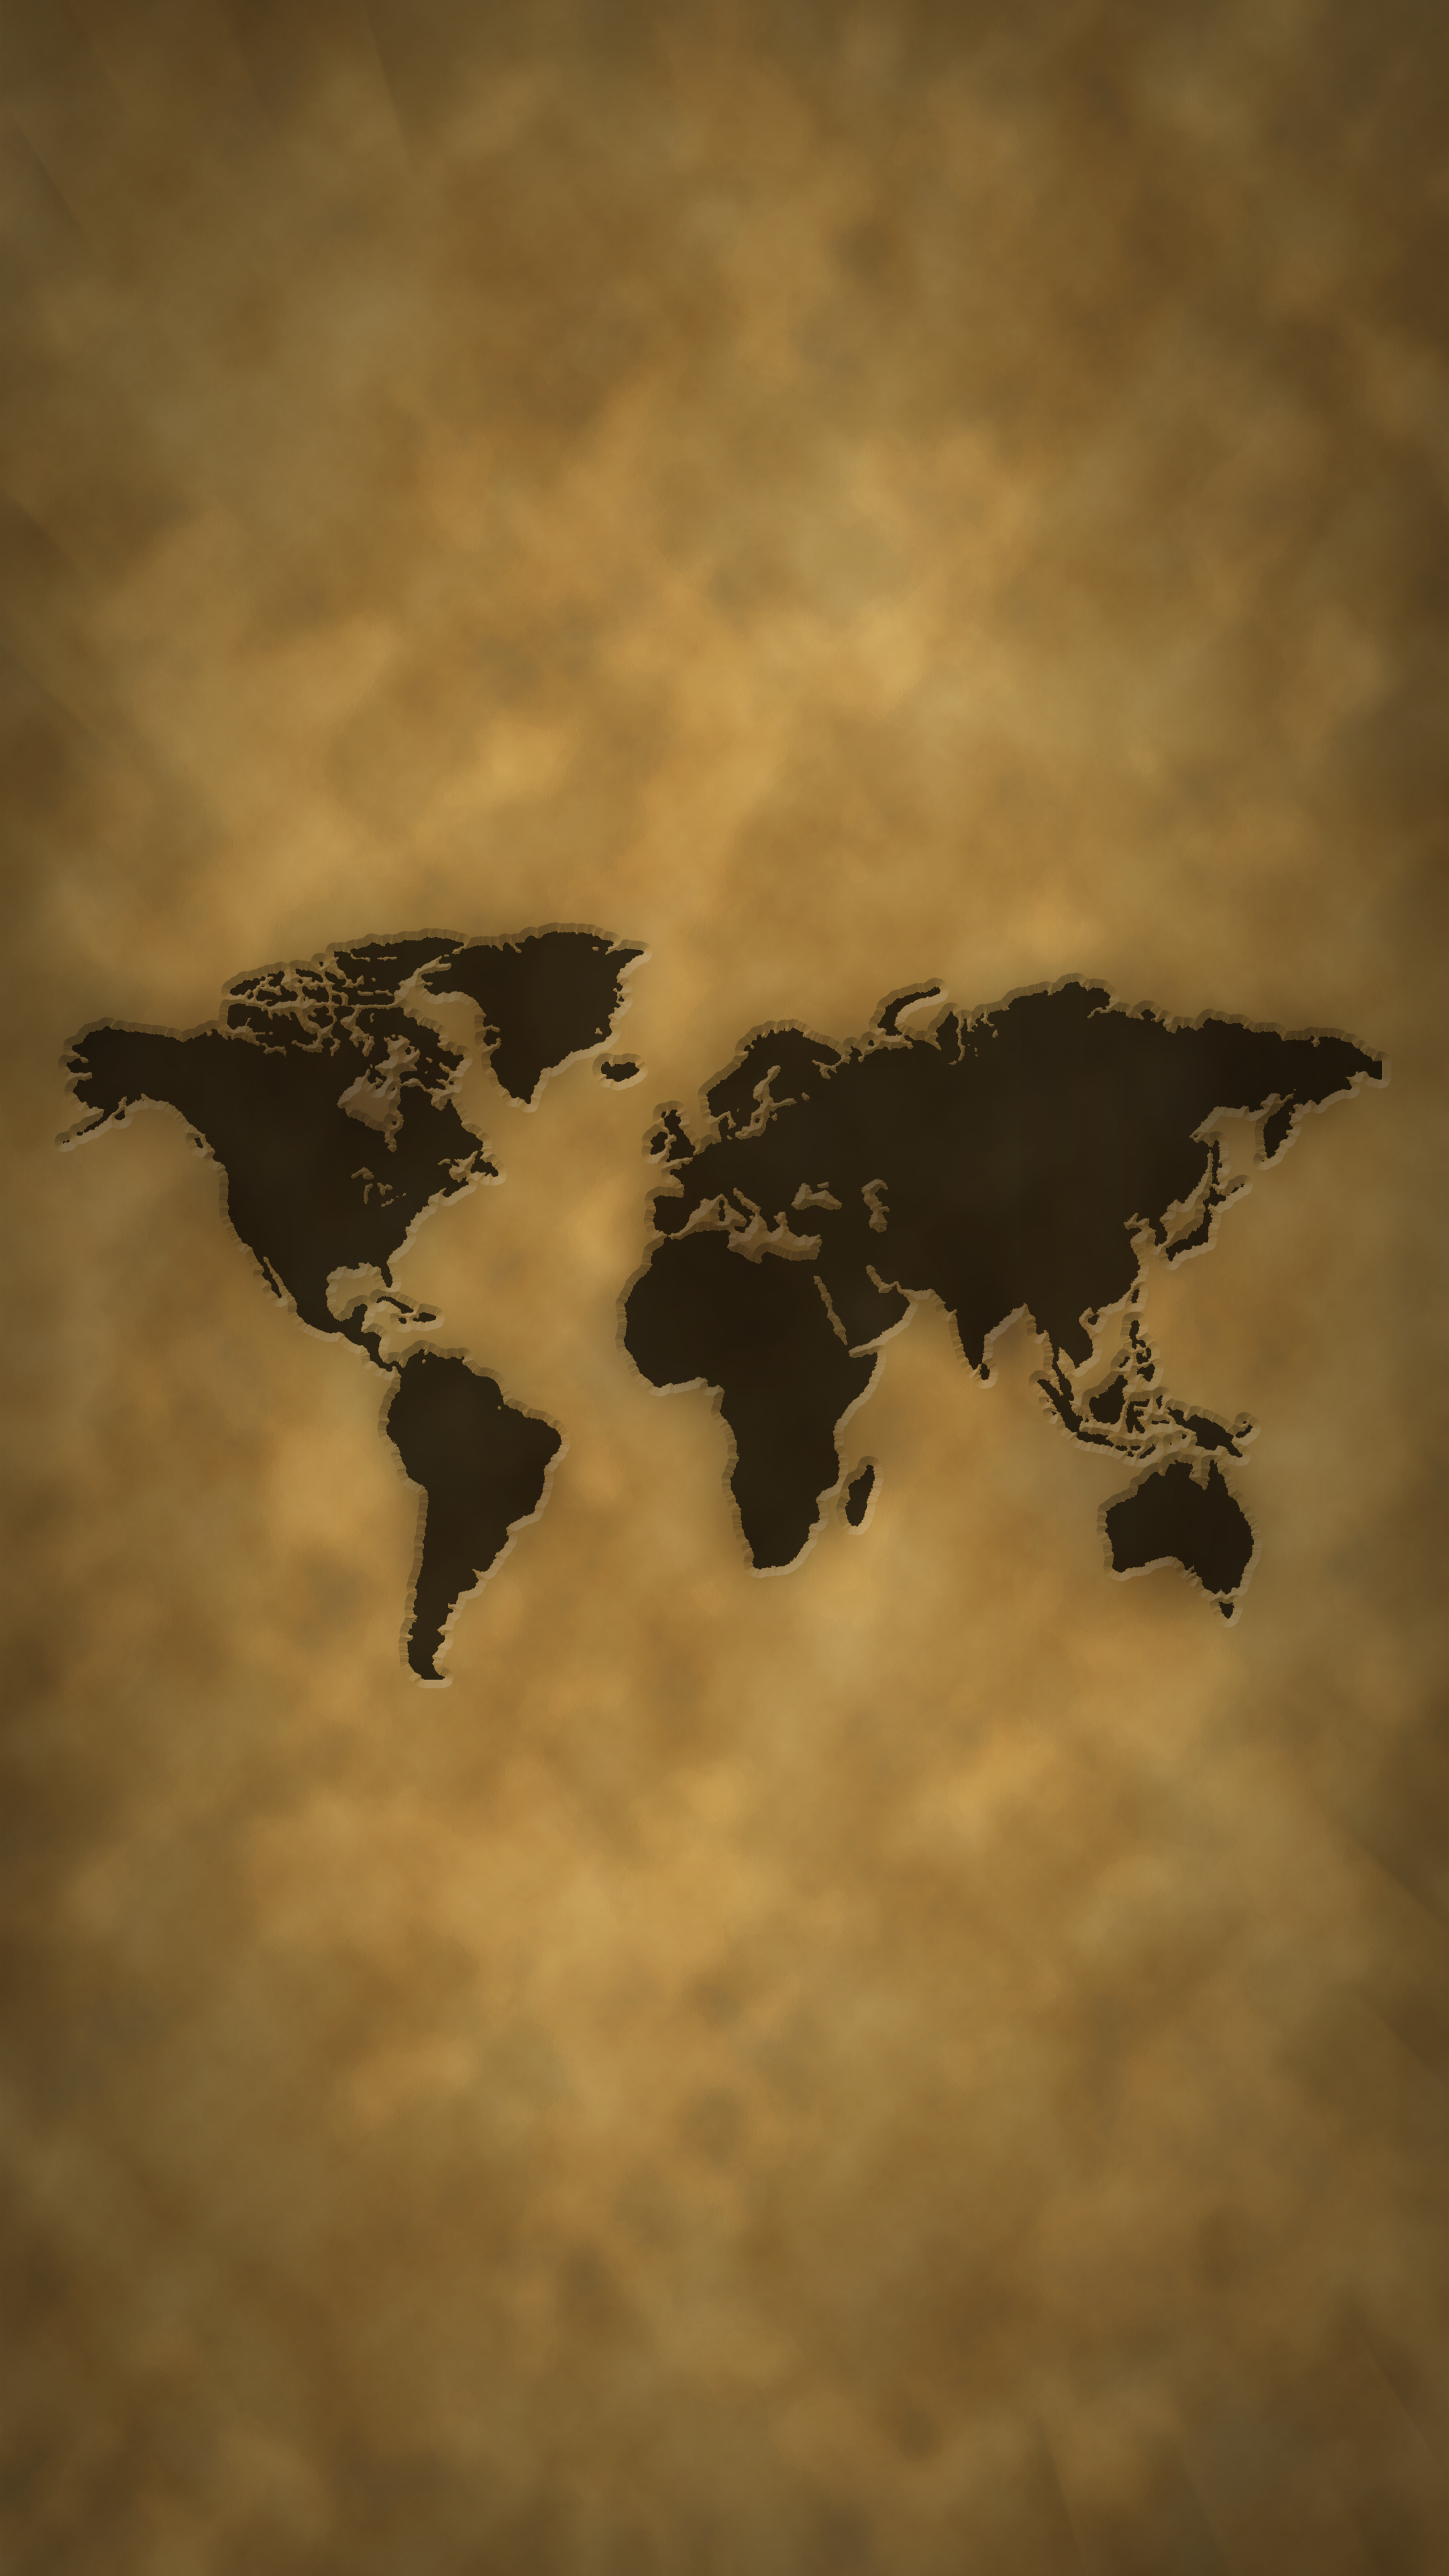 Misc world map, Various themes, Eclectic collection, Global perspectives, 2160x3840 4K Handy